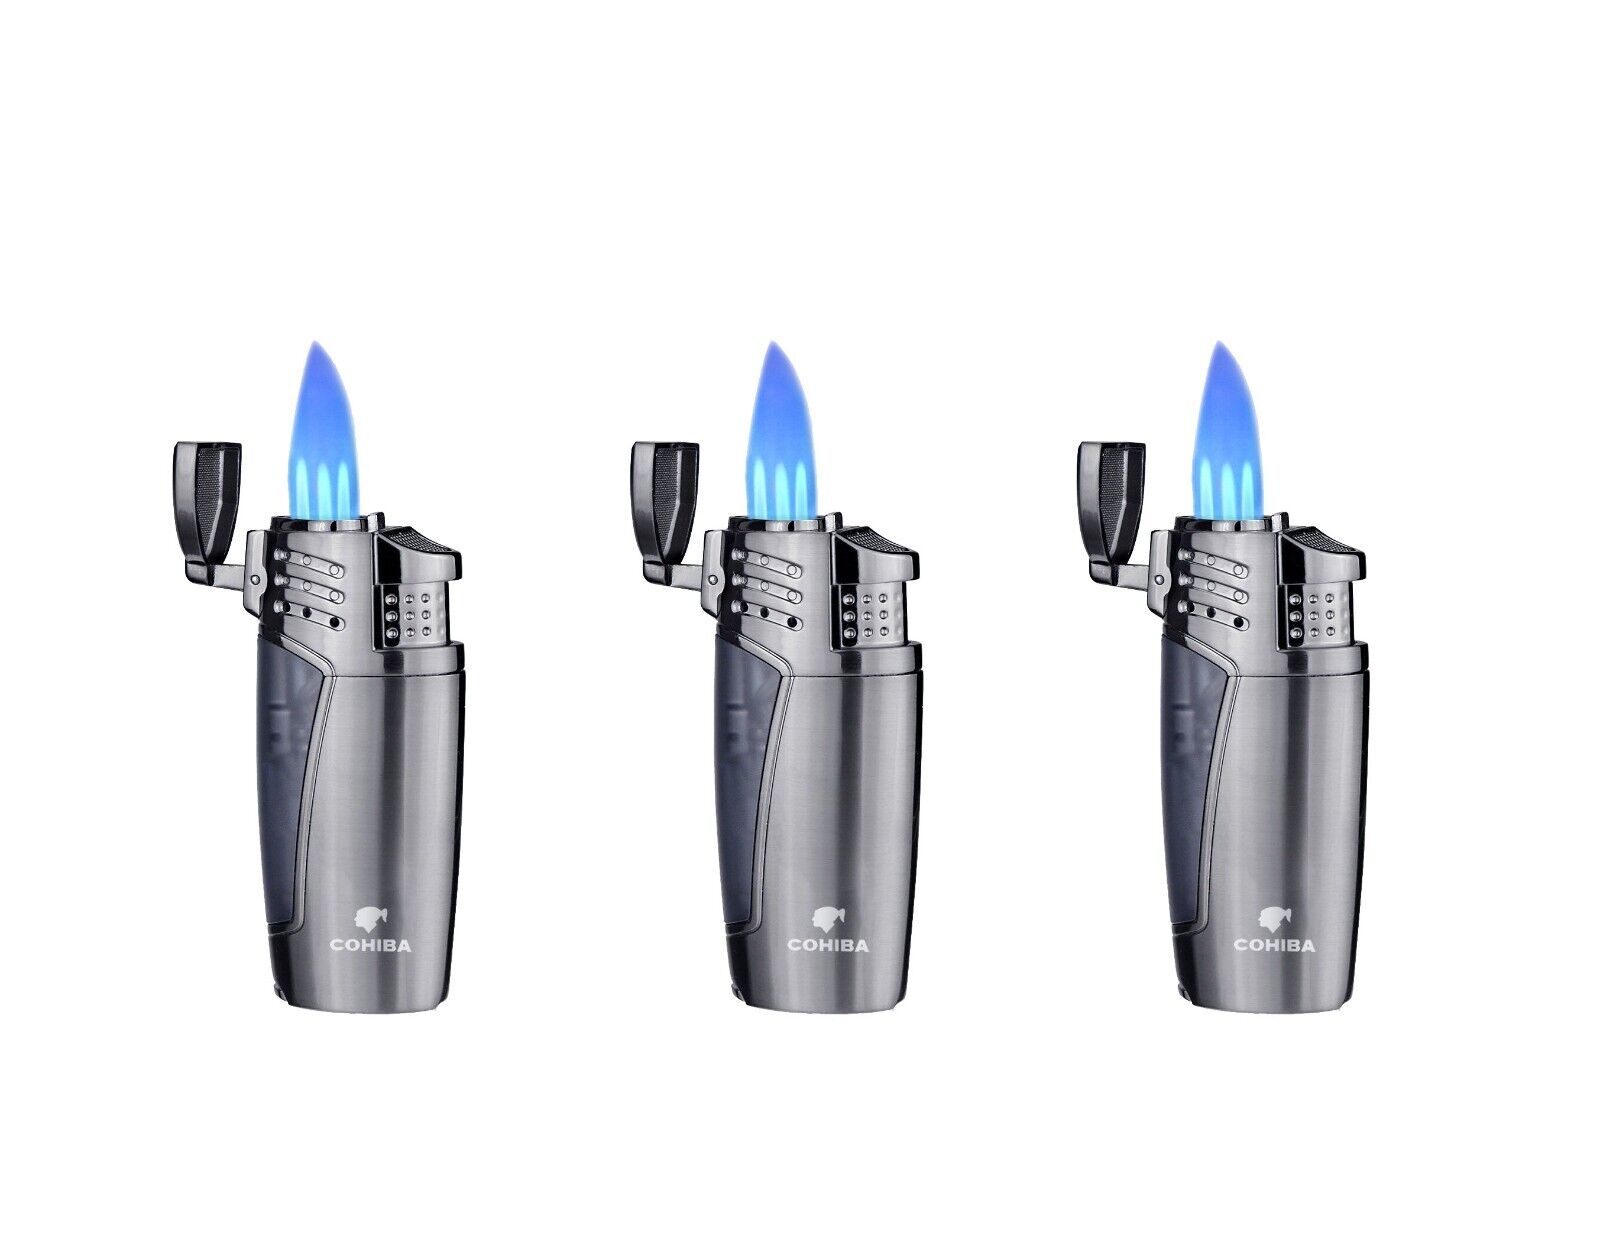 3 pcs COHIBA Butane Torch Lighters With Punch Double Jet Flame Windproof. Available Now for 18.99